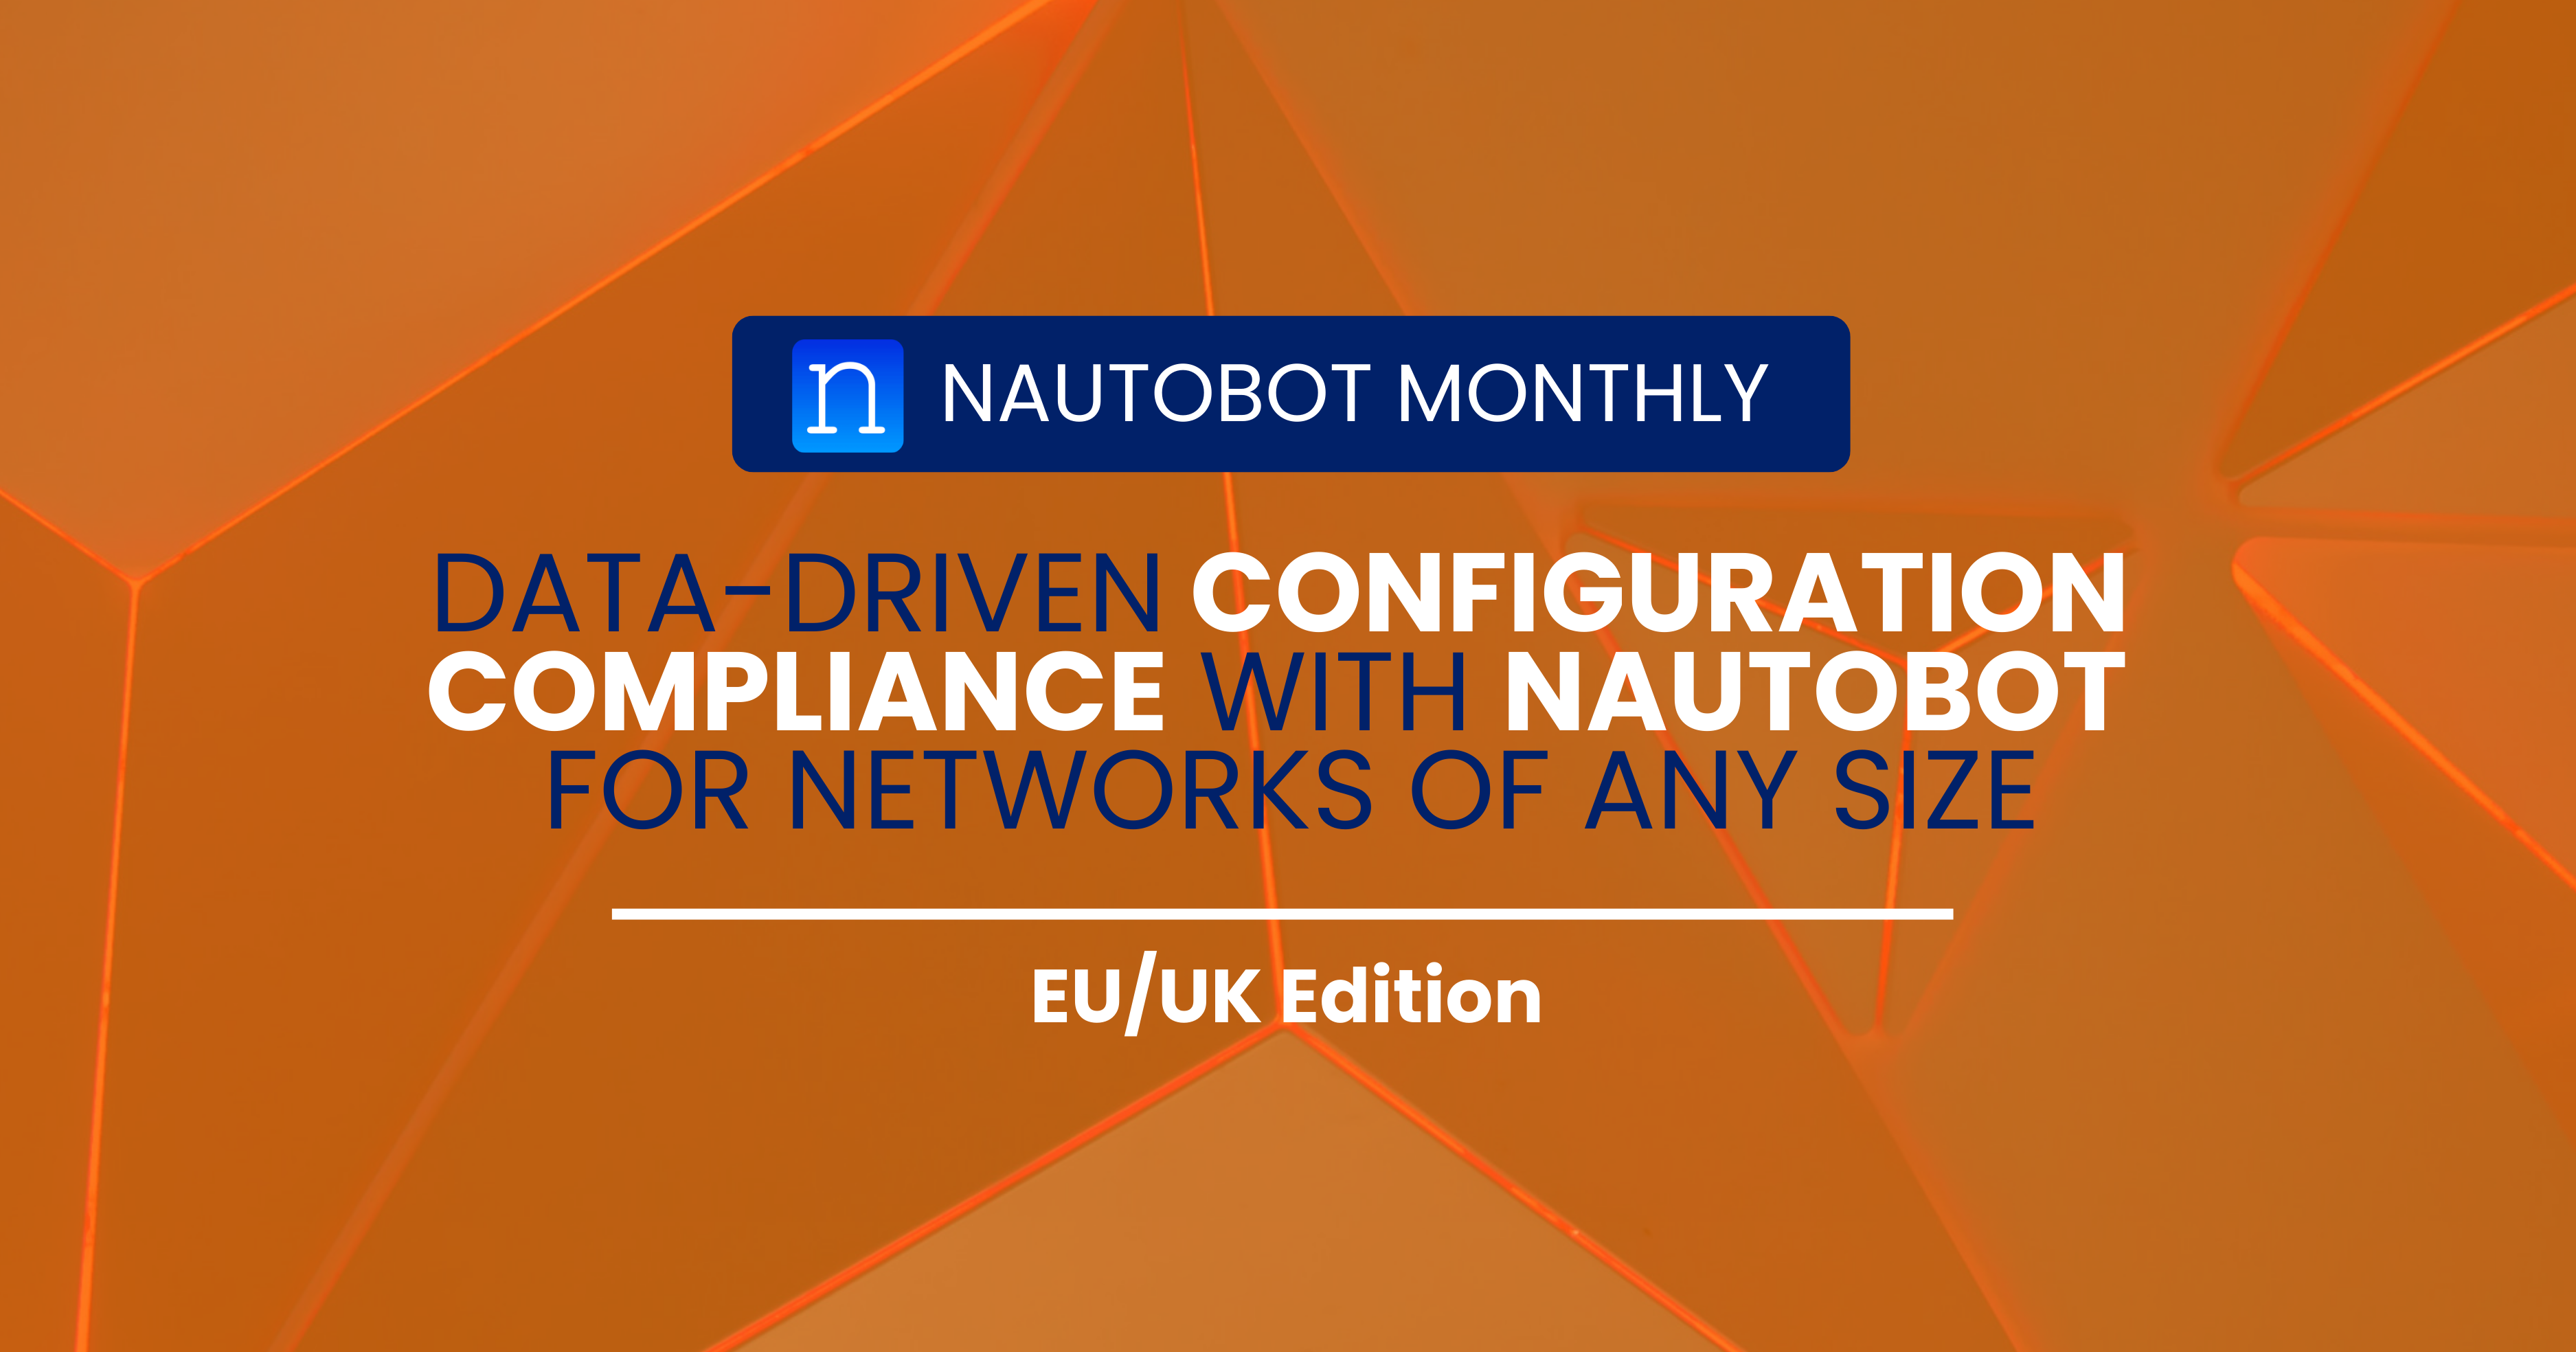 EU/UK Edition: Data-Driven Configuration Compliance with Nautobot for Networks of Any Size